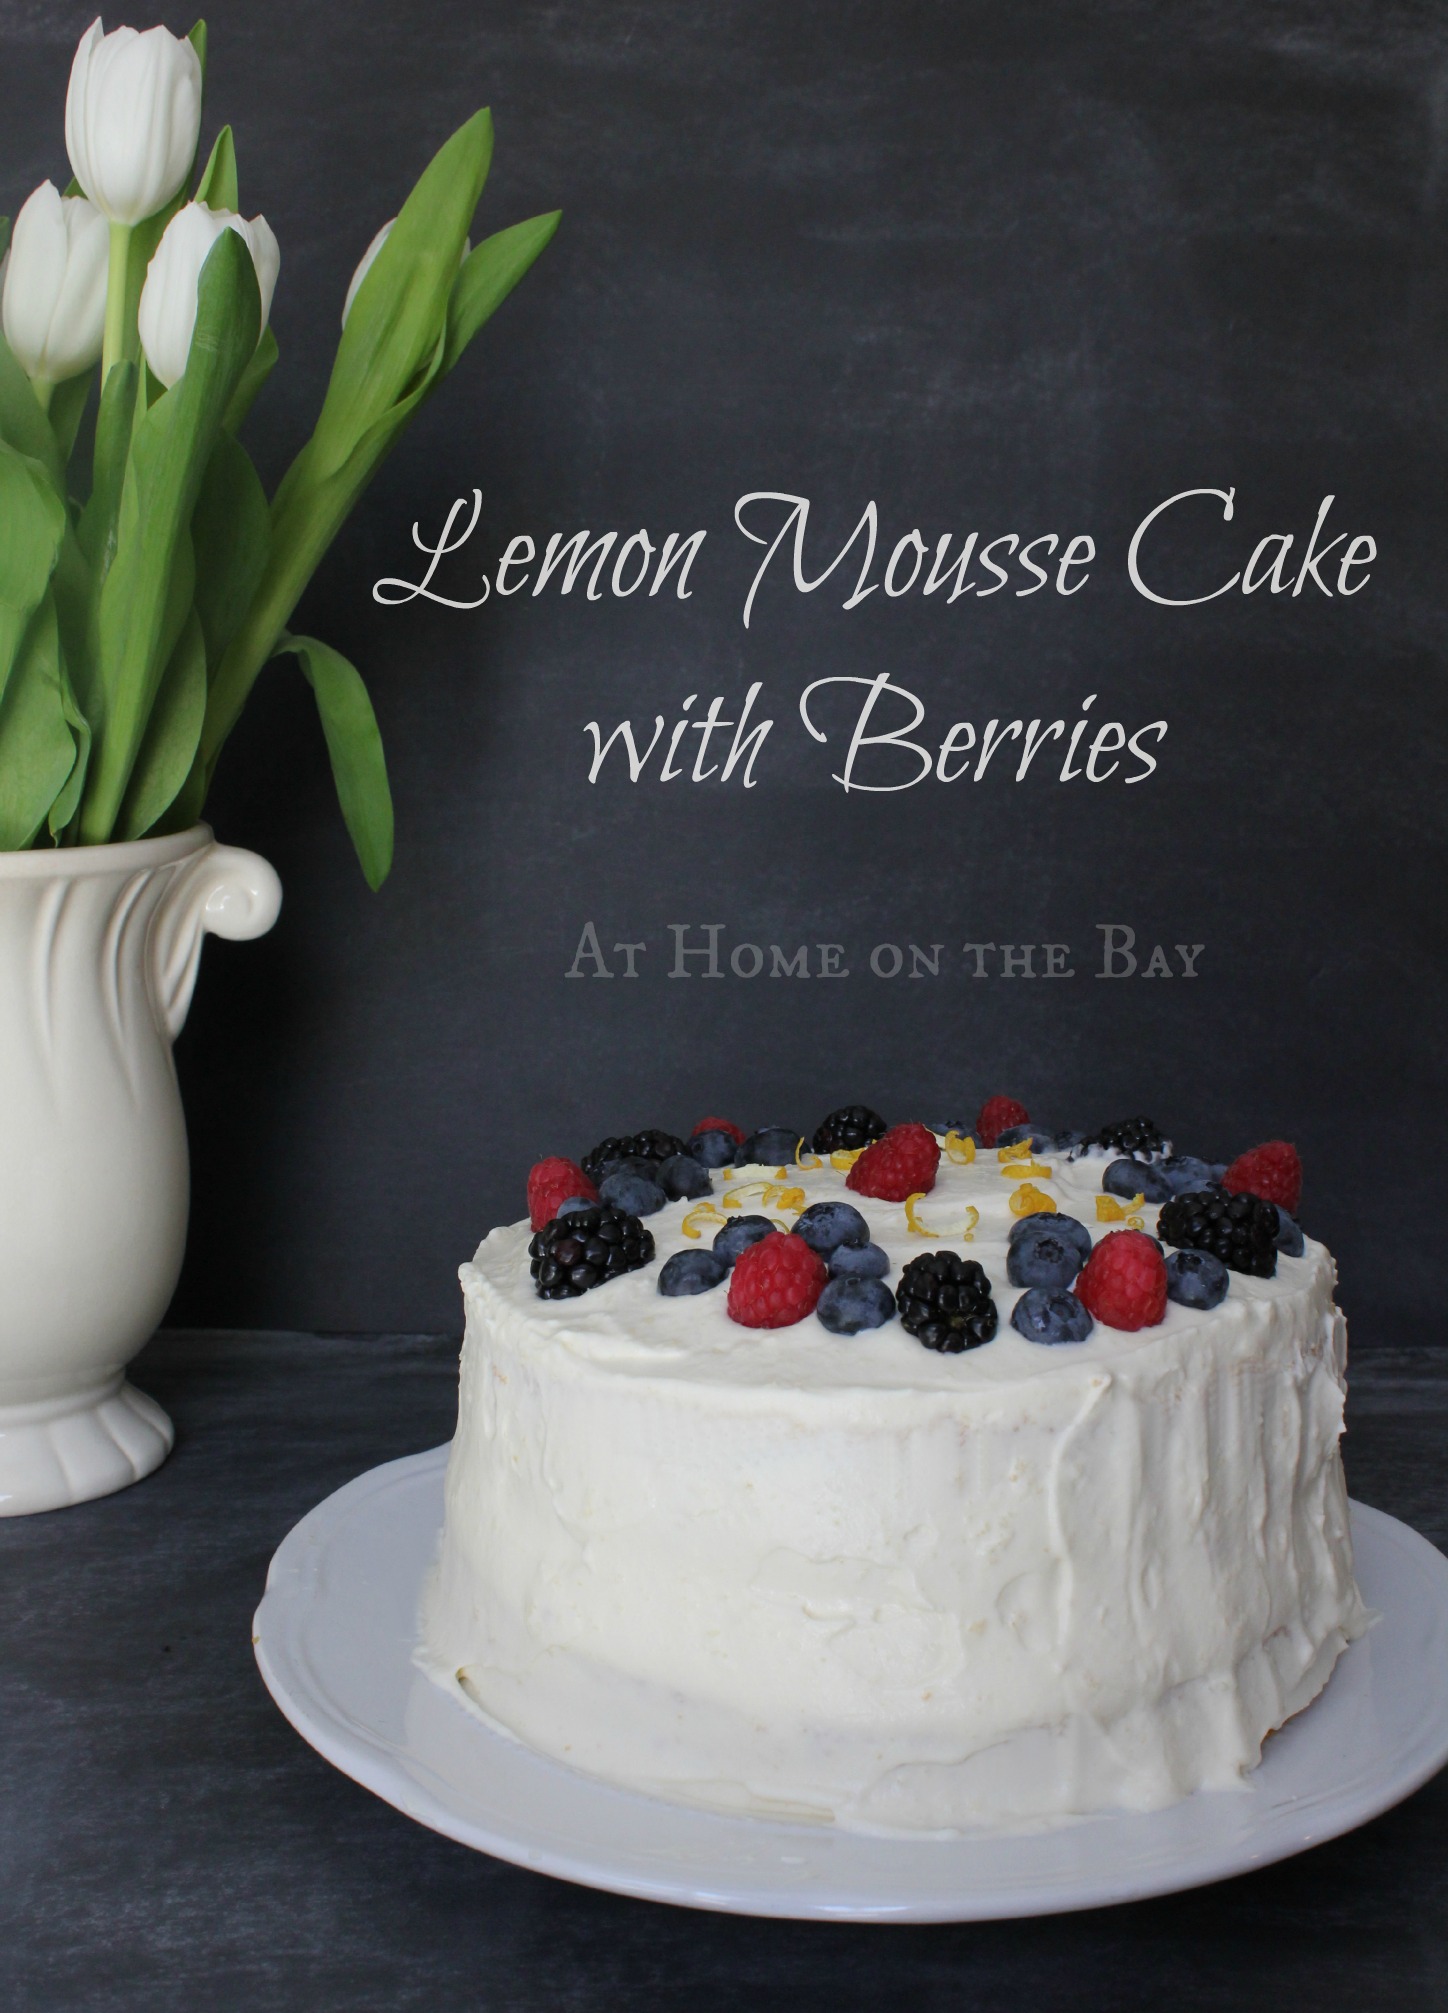 Lemon Mousse Cake with Berries